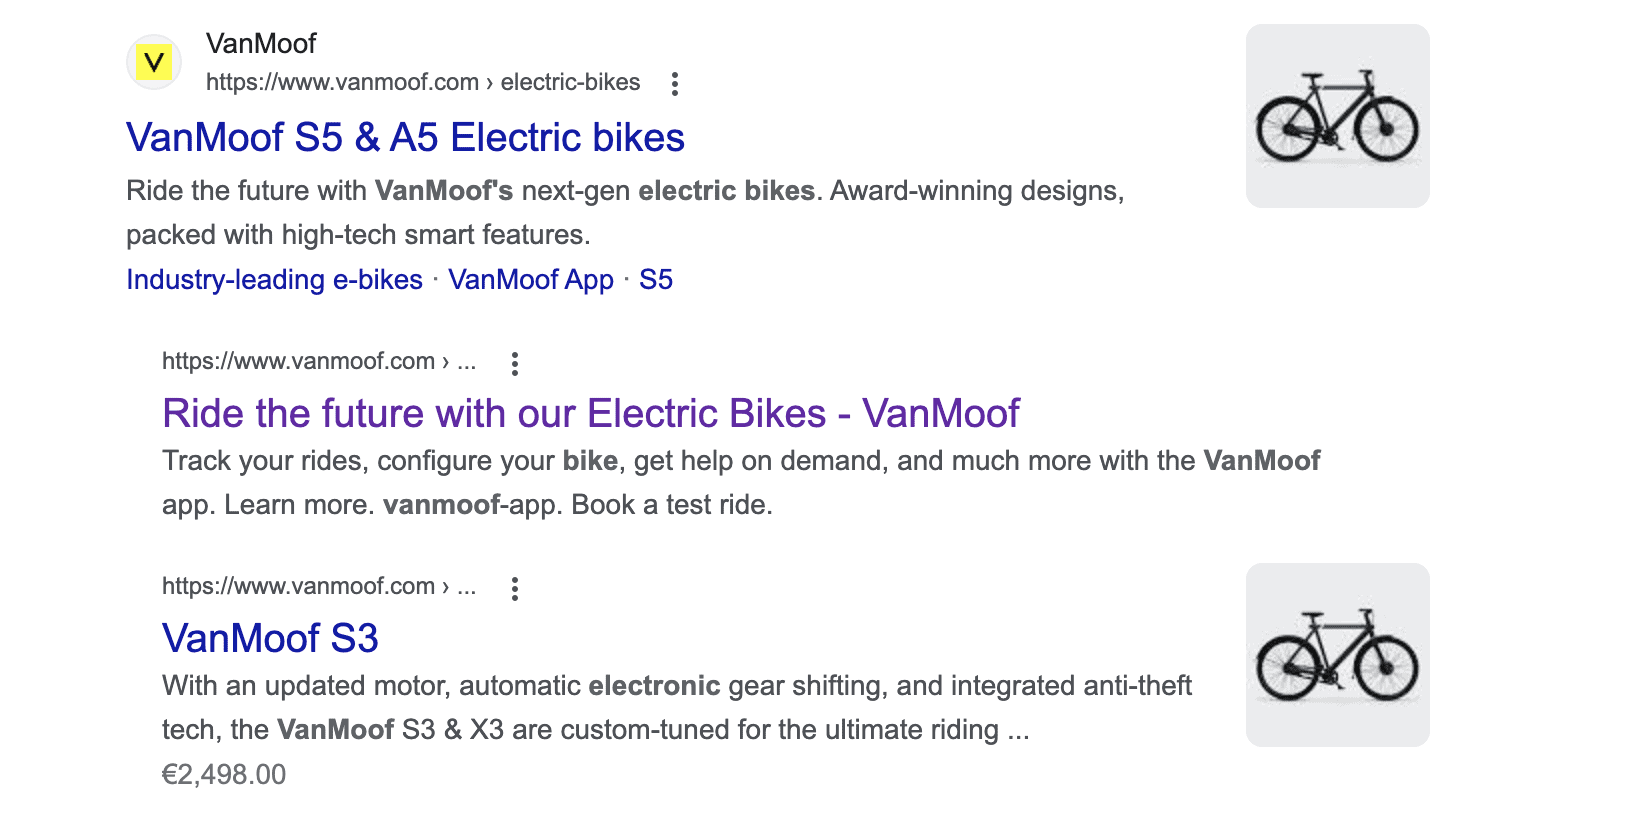 Example of Google Ads copy from VanMoof